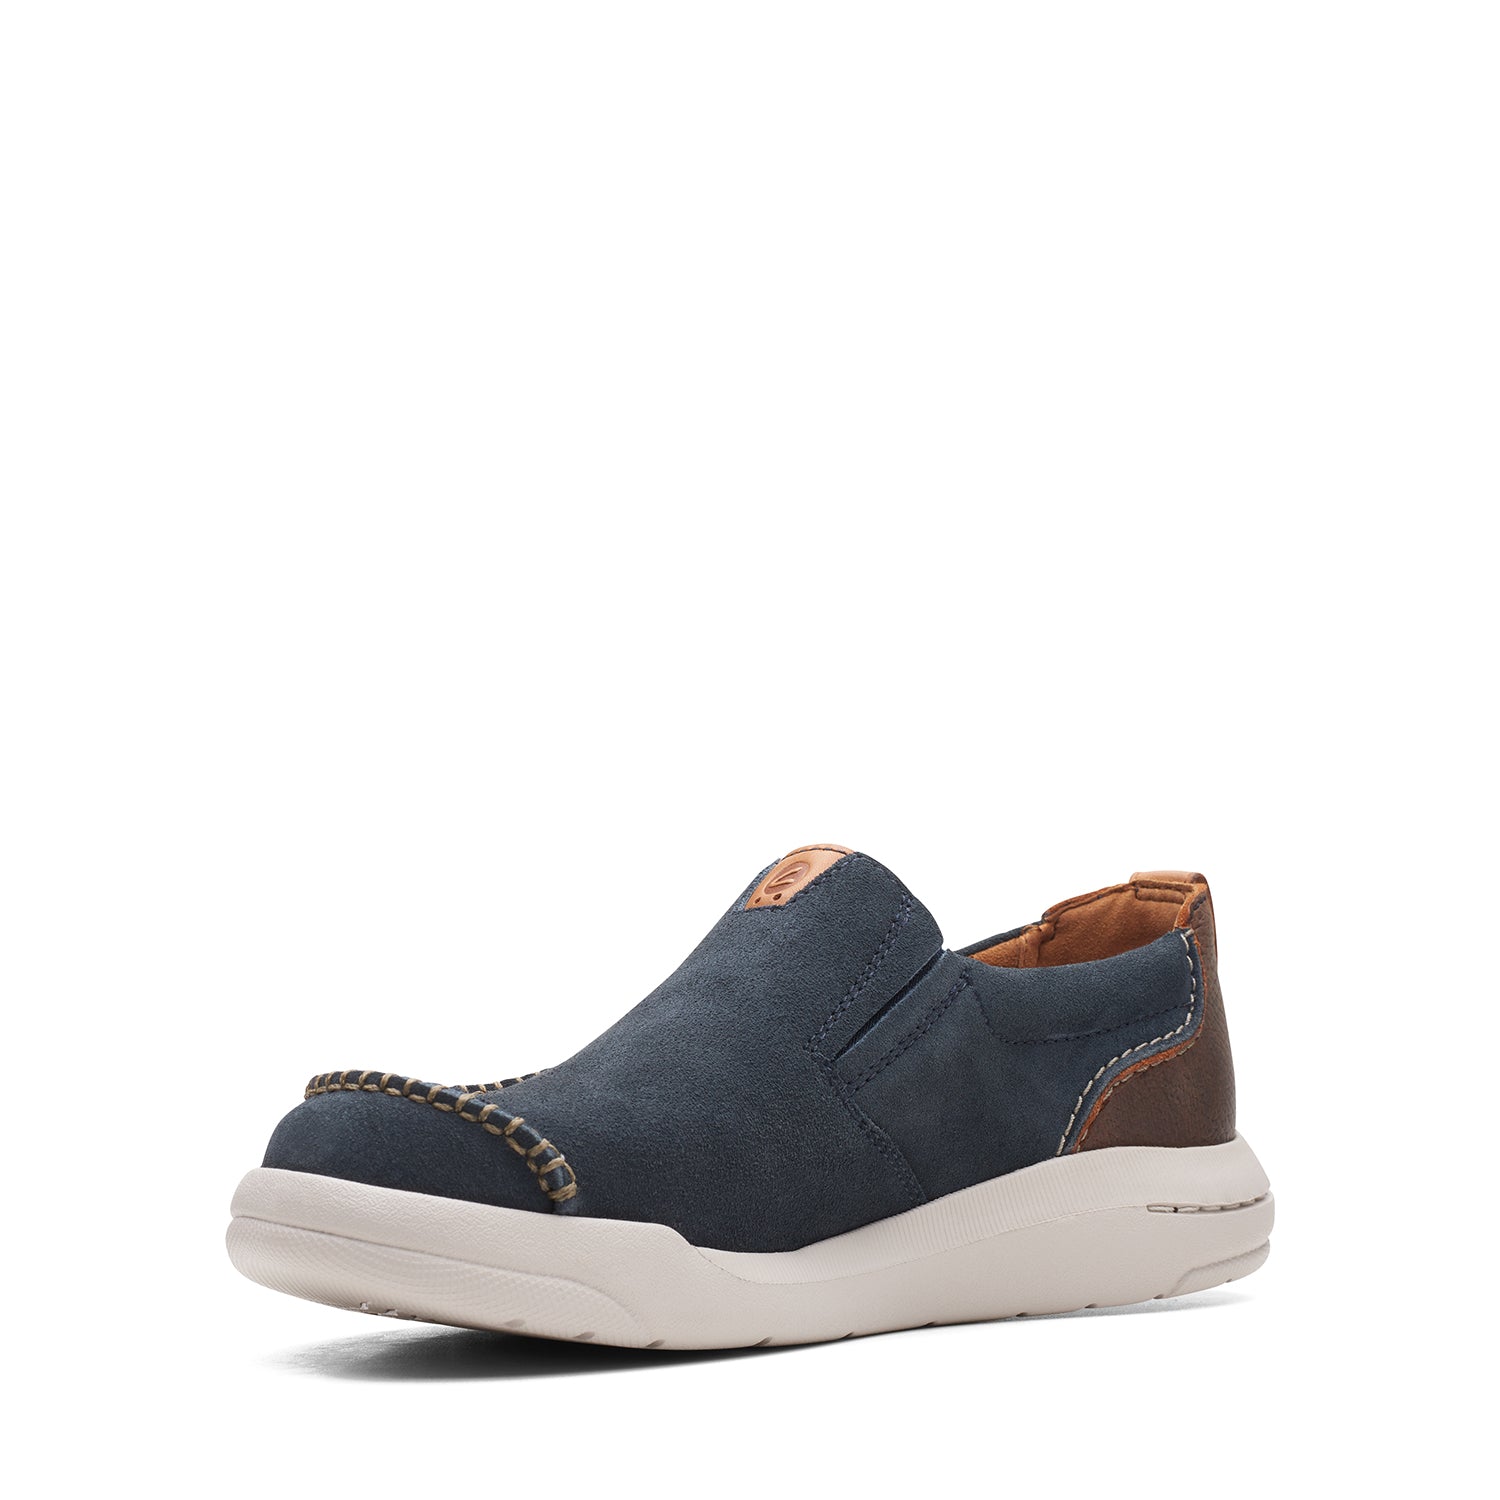 Clarks Driftway Step Shoes - Navy Suede - 261638577 - G Width (Standard Fit)